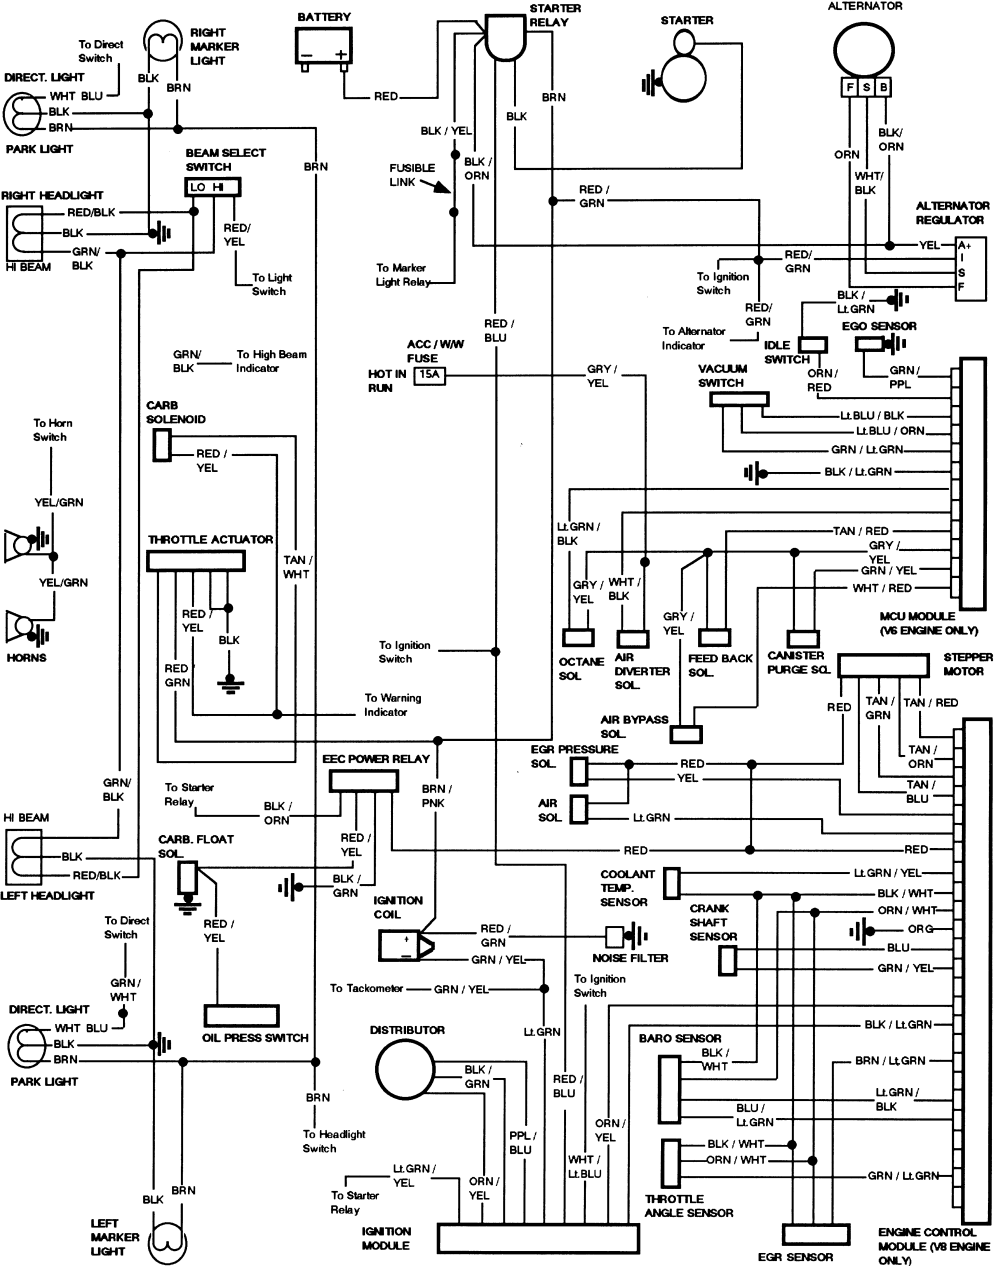 1978 Ford F150 Starter Solenoid Wiring Diagram from econtent.autozone.com